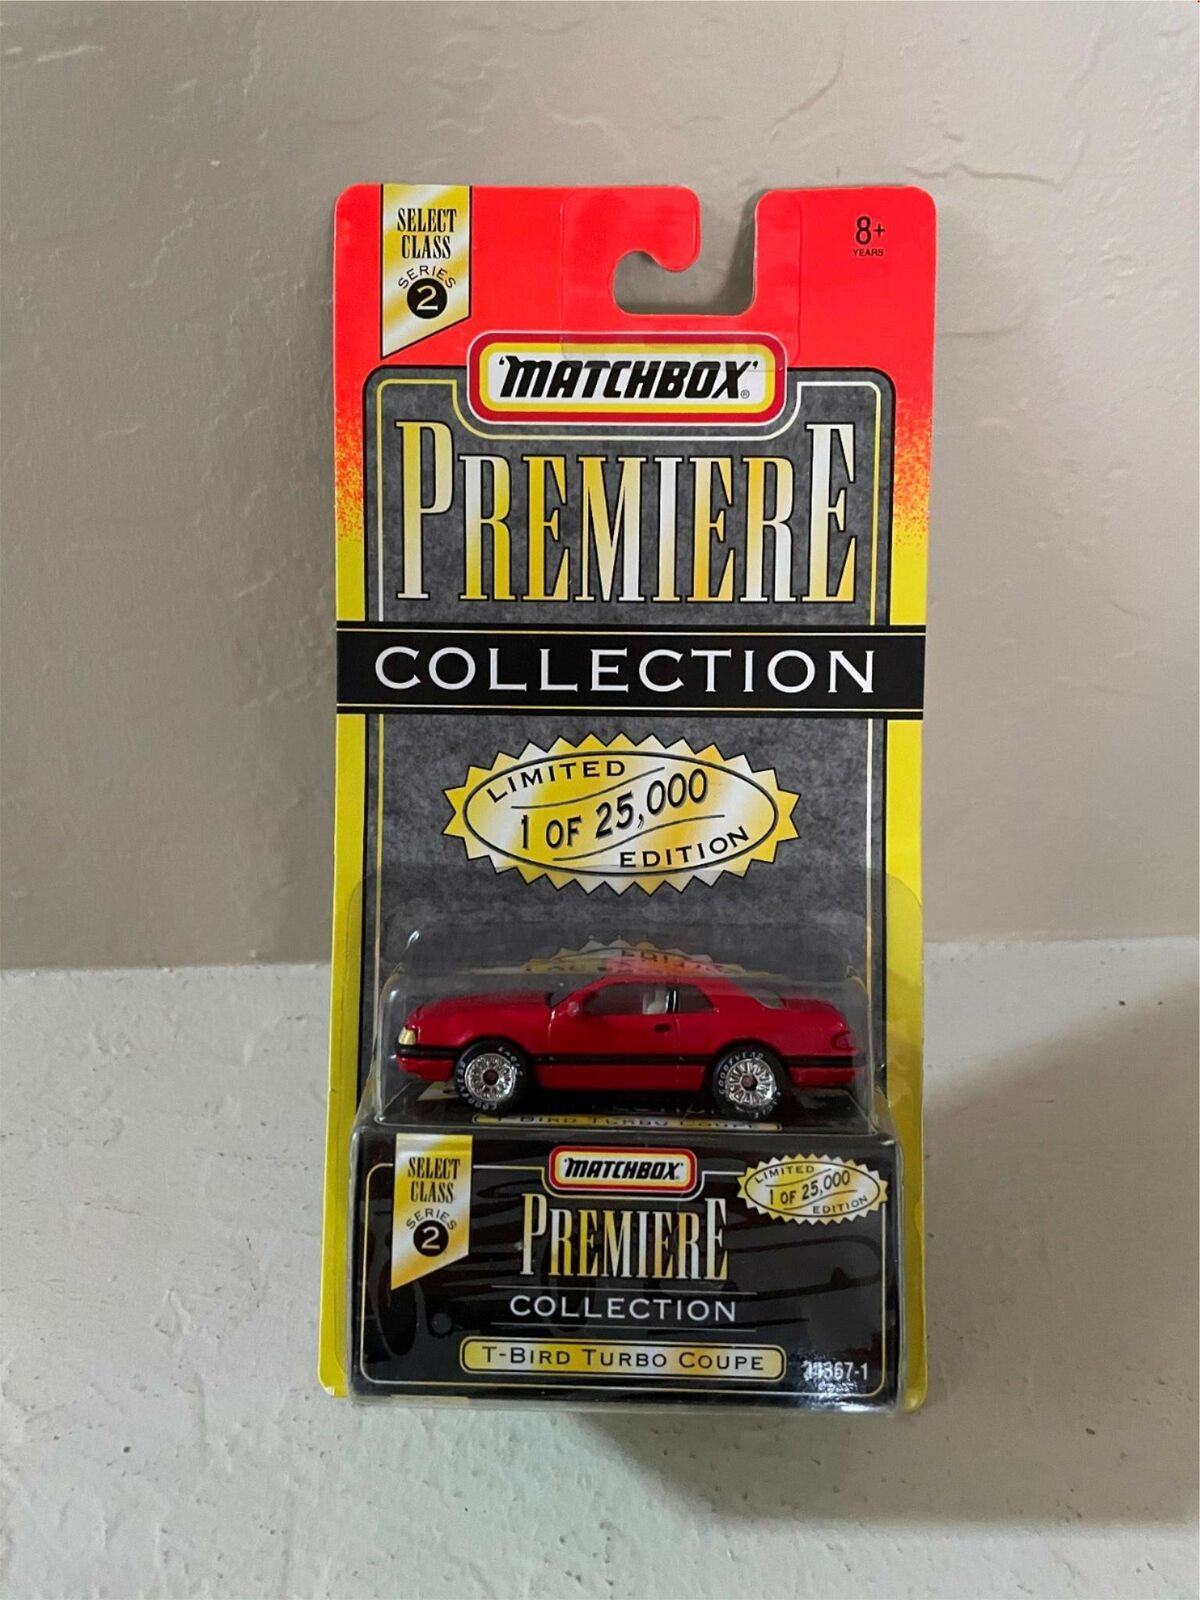 Matchbox Premiere Collection T-Bird Turbo Coupe Select Class Series 2 Red D15